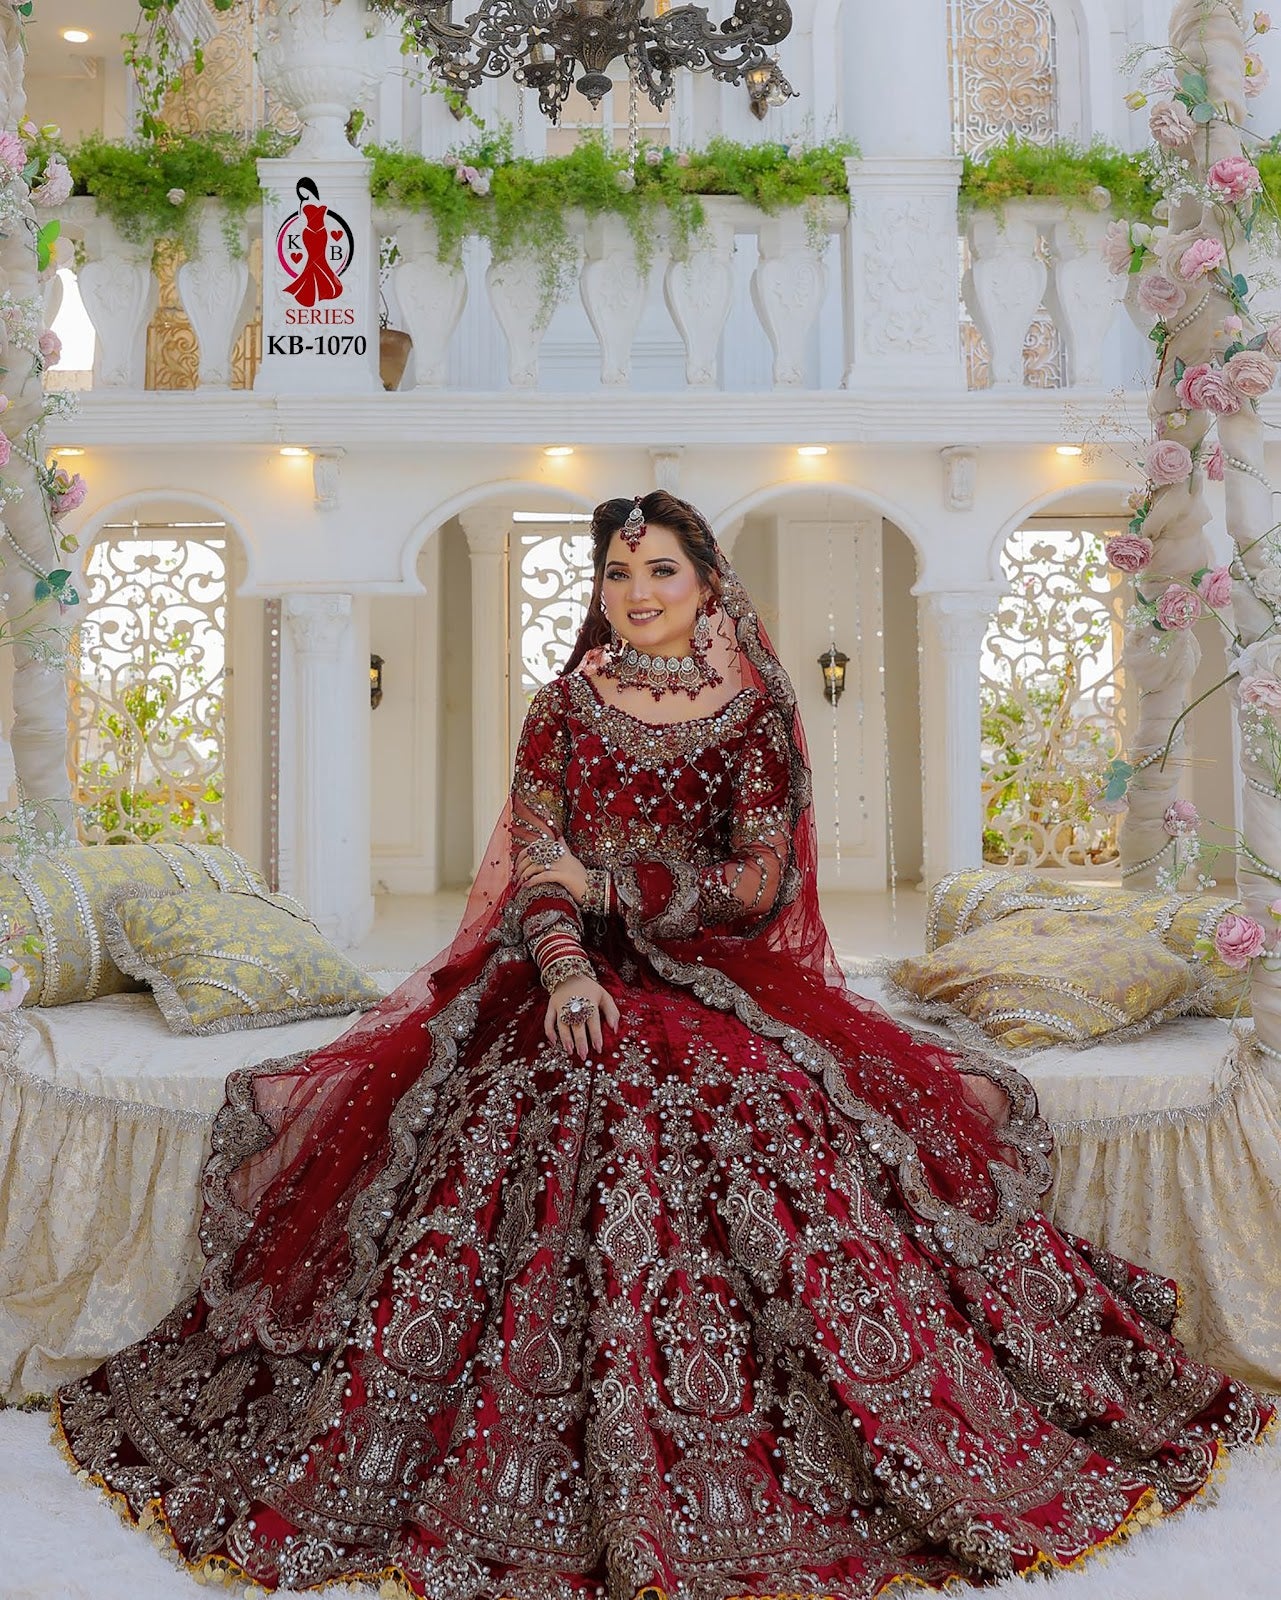 Groom Outfit Ideas To Complement a Bridal Red Lehenga